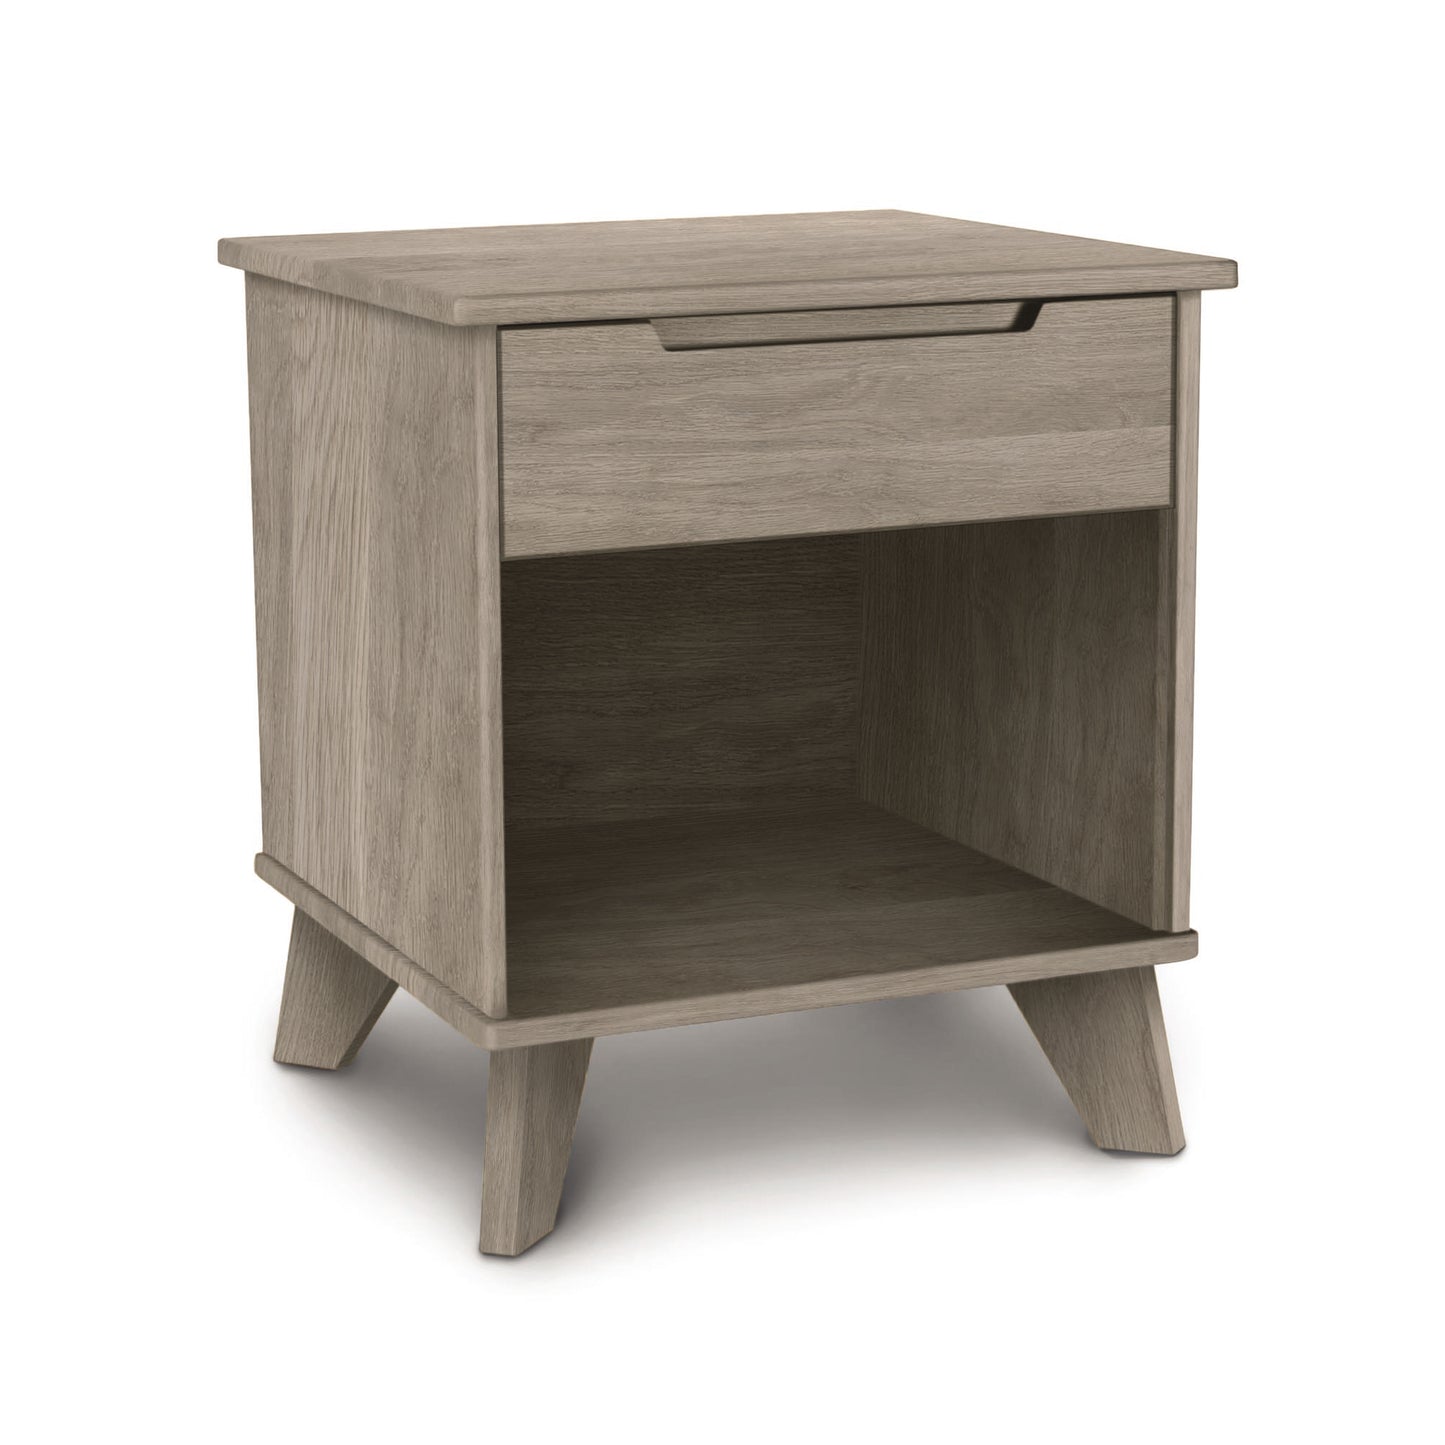 This Linn 1-Drawer Enclosed Shelf Nightstand by Copeland Furniture features a convenient drawer on top.